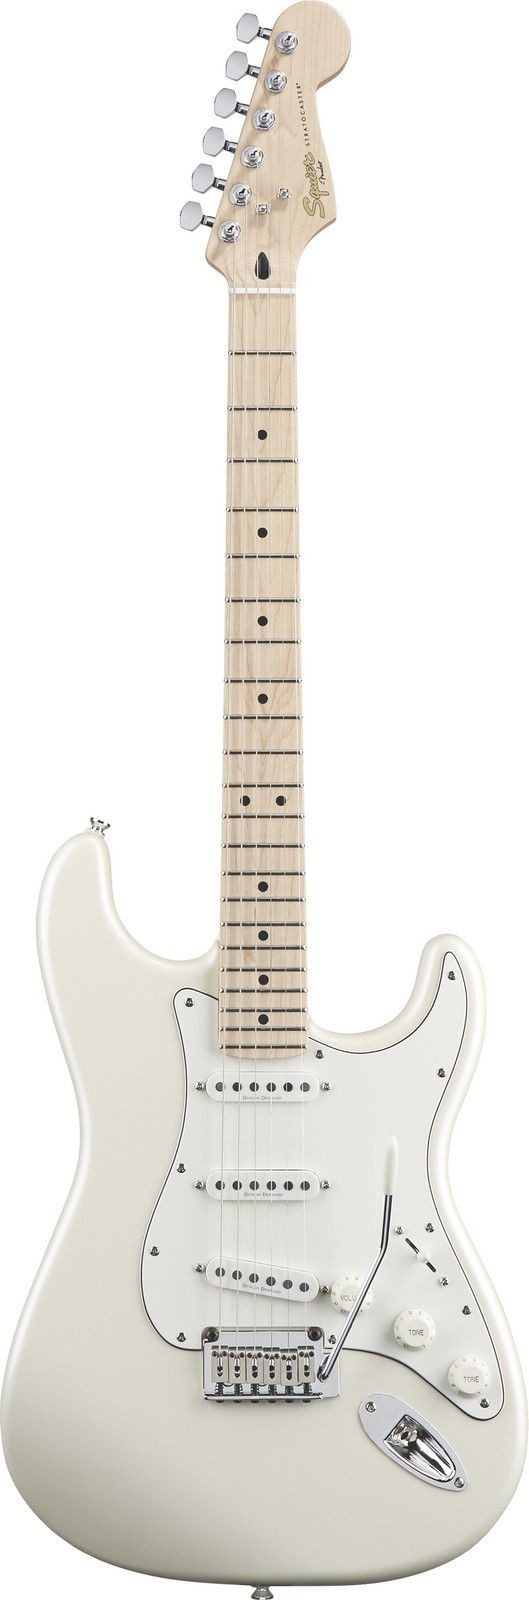 Fender American Standard Stratocaster Electric Guitar with a Maple Neck in Olympic White